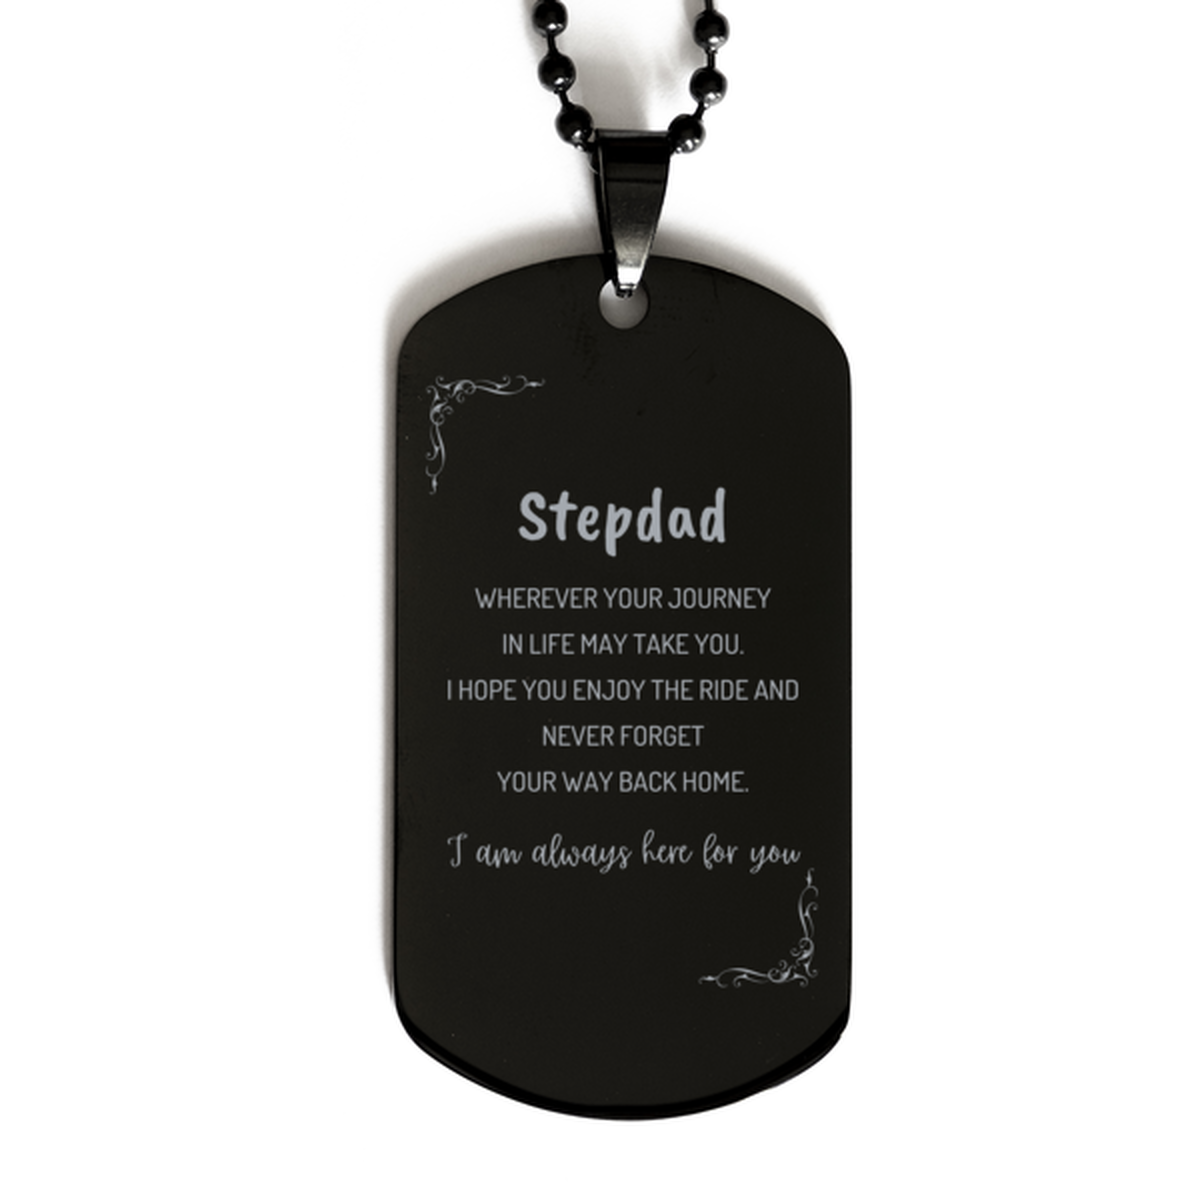 Stepdad wherever your journey in life may take you, I am always here for you Stepdad Black Dog Tag, Awesome Christmas Gifts For Stepdad, Stepdad Birthday Gifts for Men Women Family Loved One